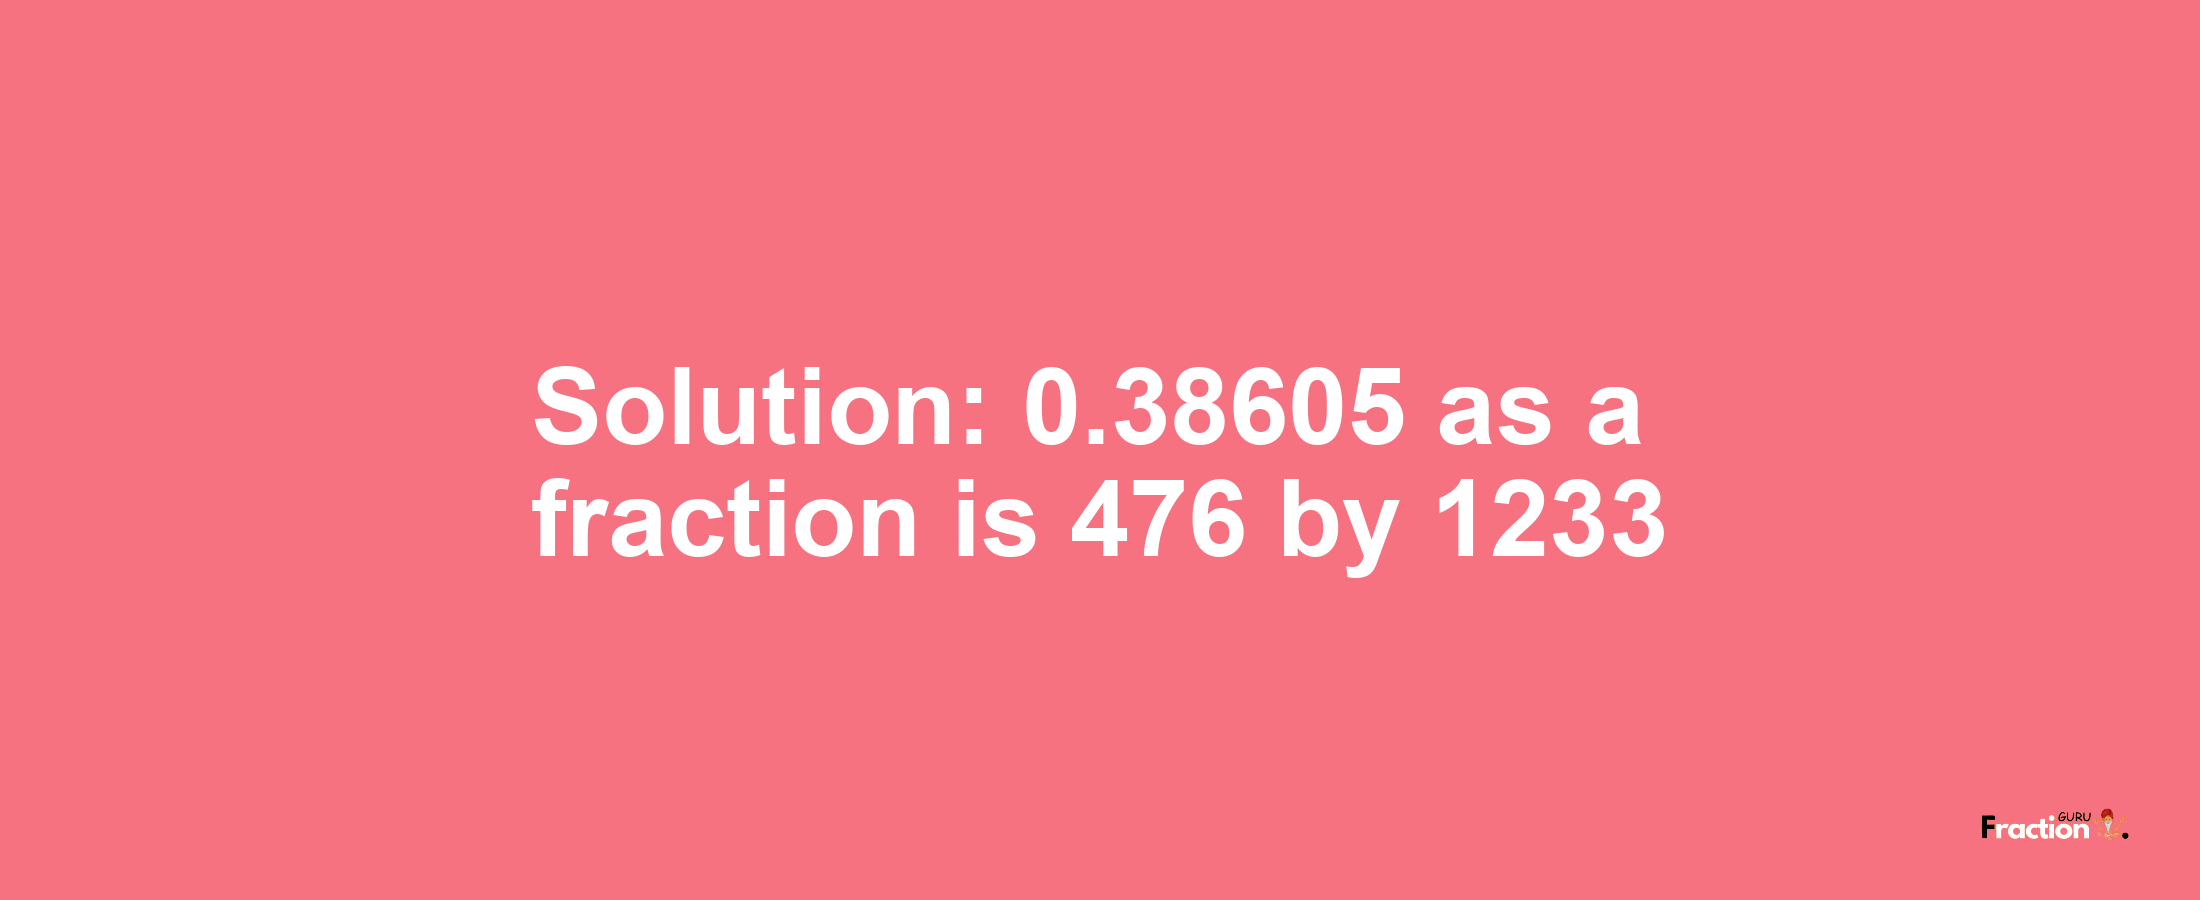 Solution:0.38605 as a fraction is 476/1233